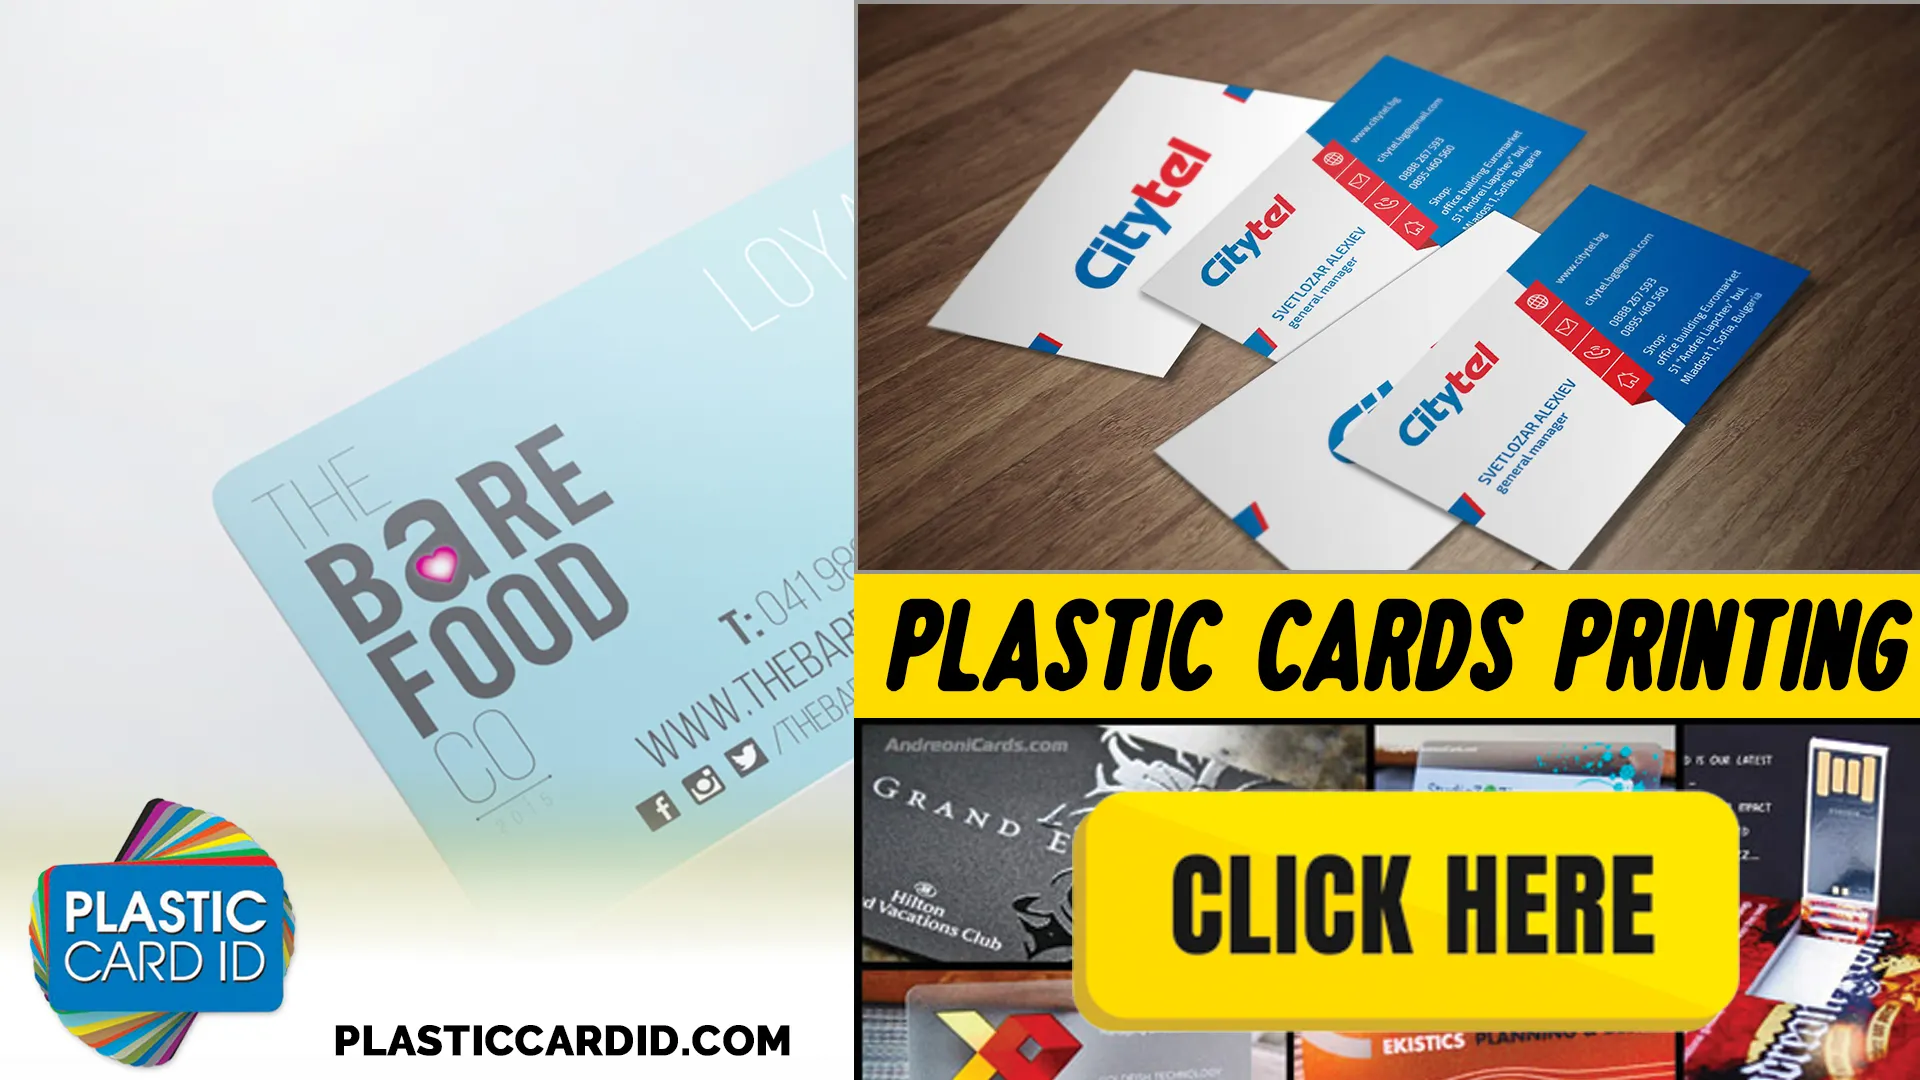 Plastic Card ID




: Leading the Charge in Sustainable Card Manufacturing